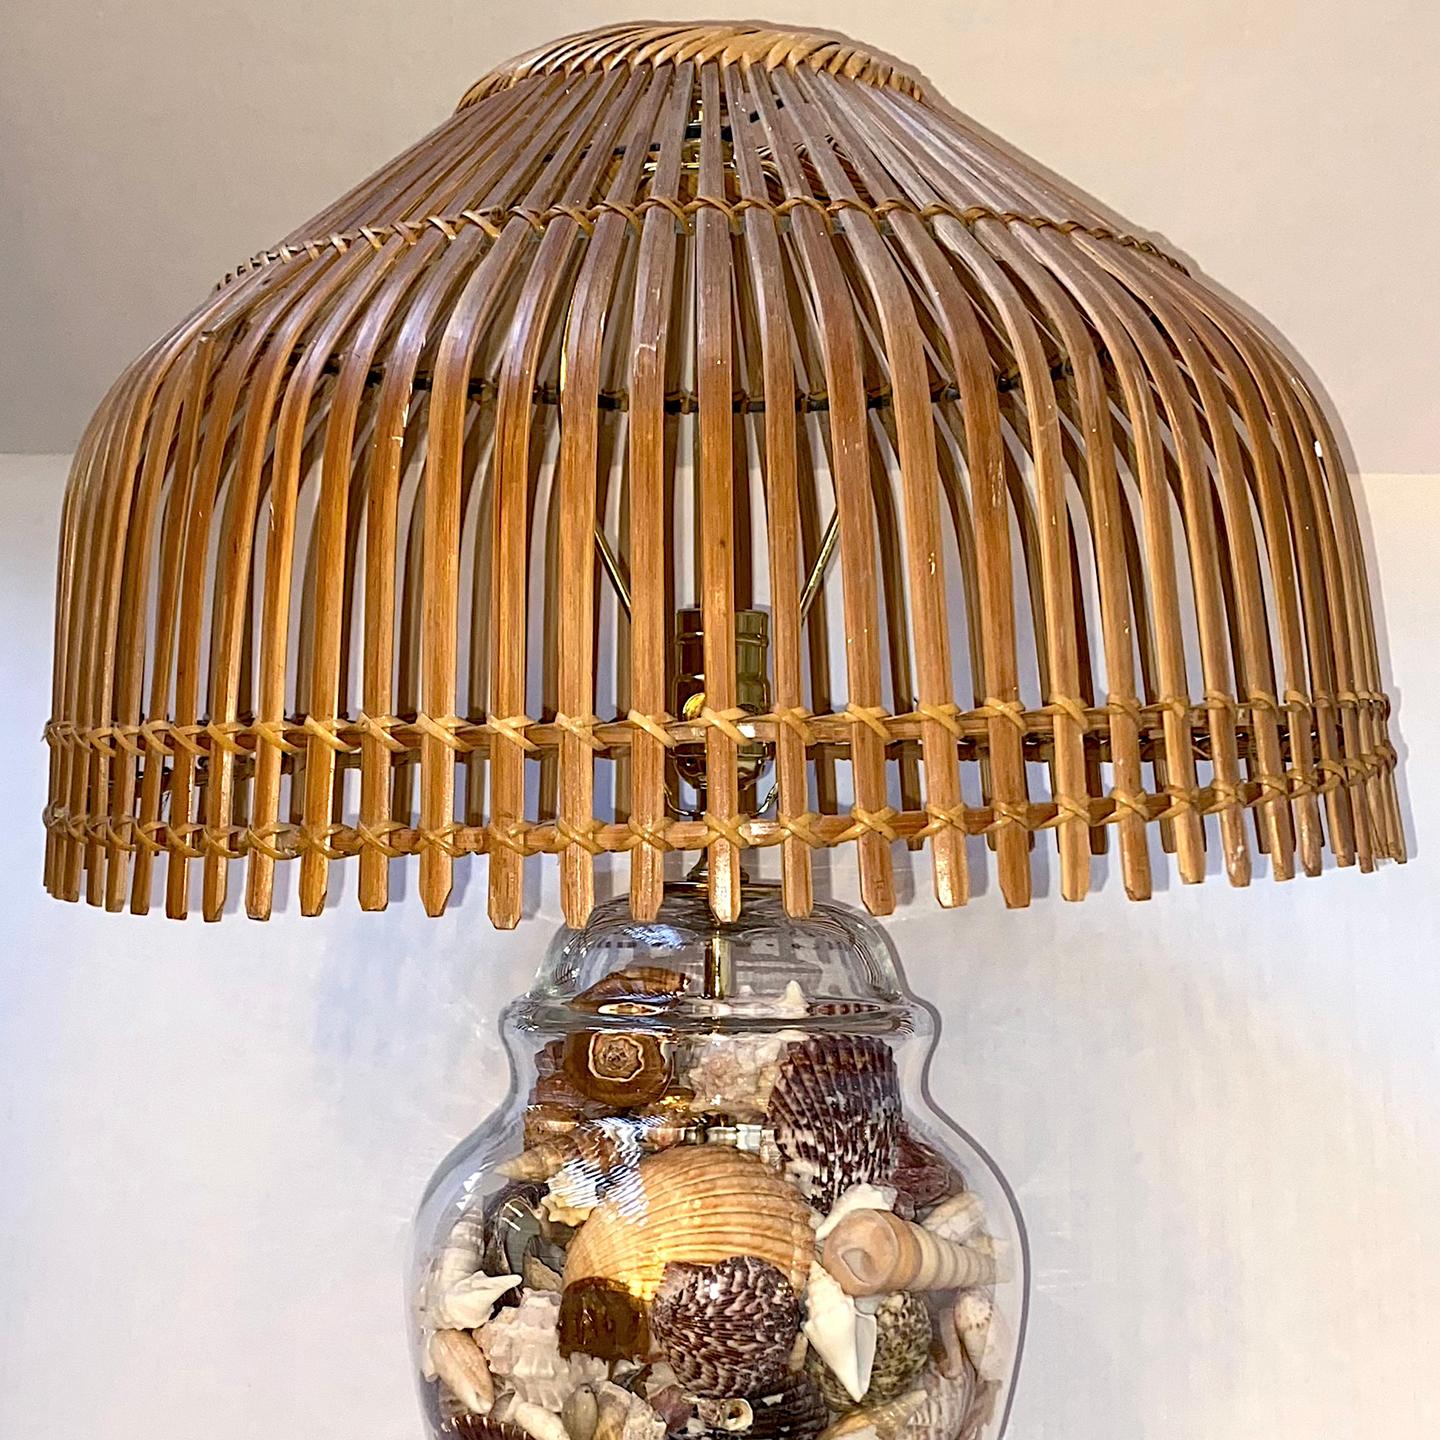 A circa 1960's American glass lamp with shells and bamboo shade.

Measurements:
Shade Diameter: 18.5